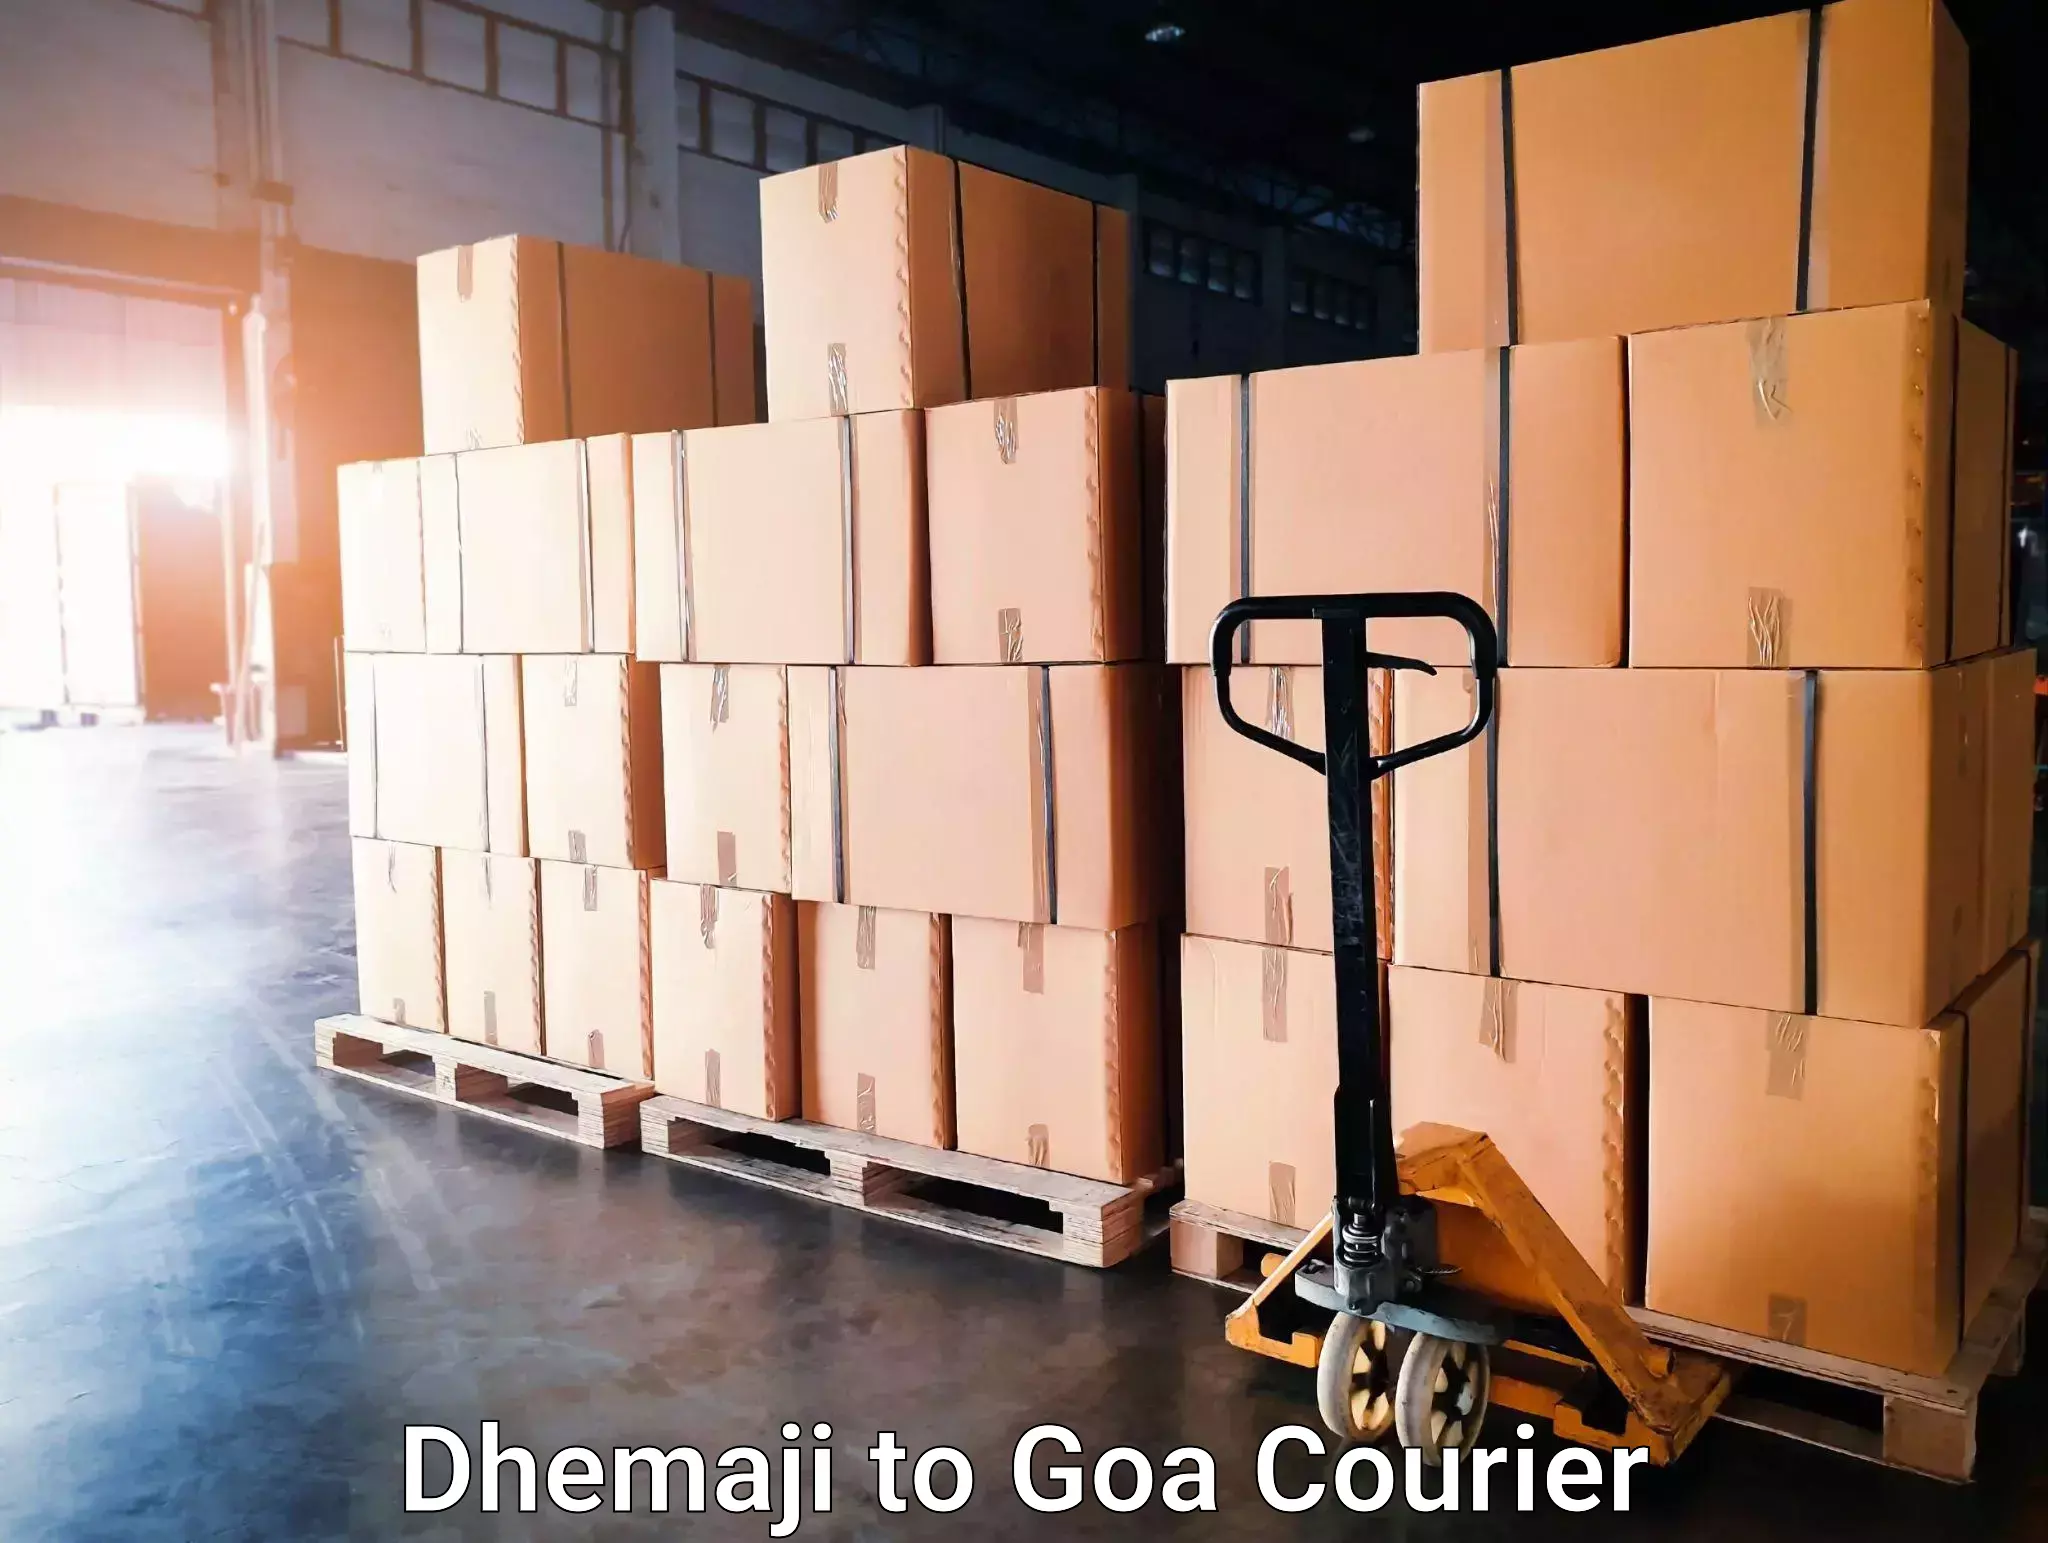 Courier service efficiency Dhemaji to Bardez